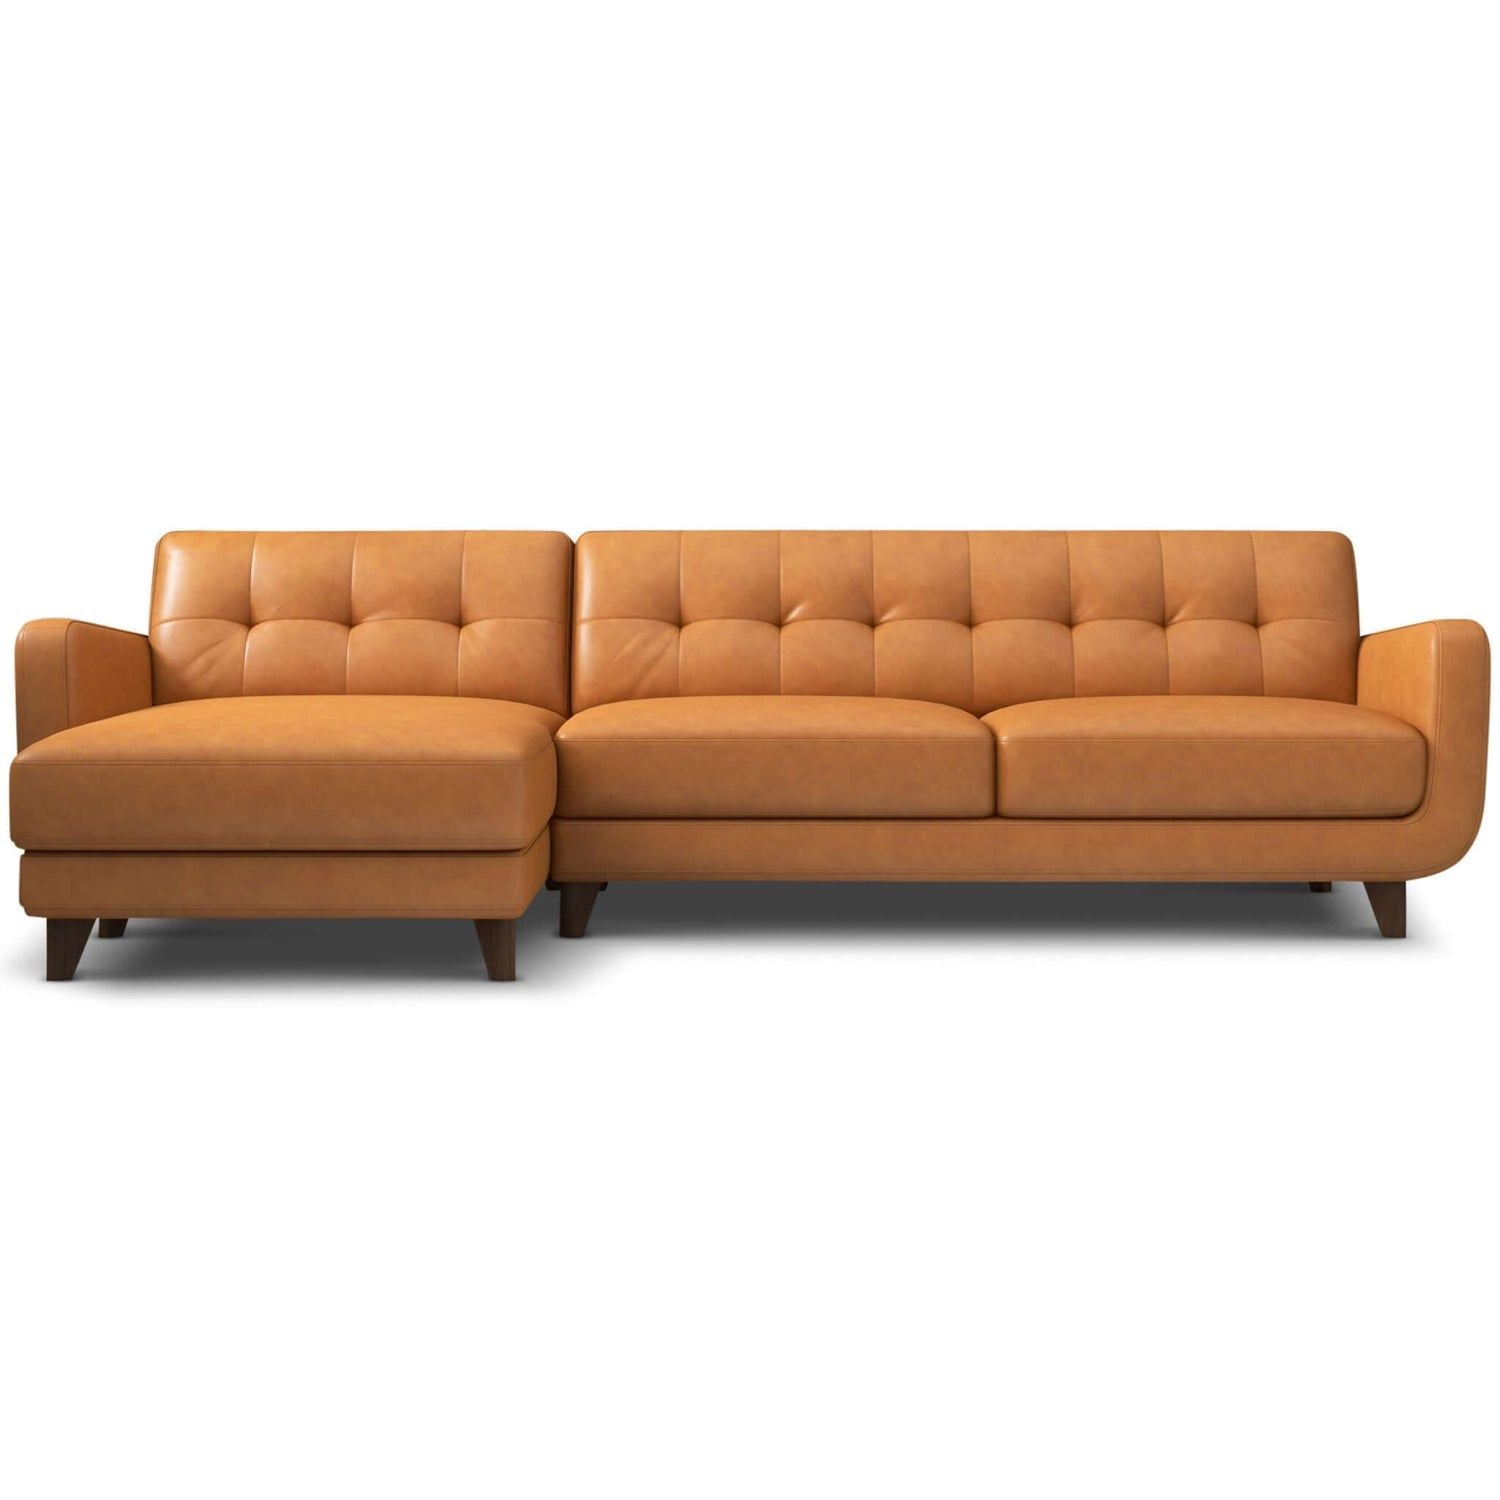 Allison - Leather Sectional Sofa Chaise - Tan